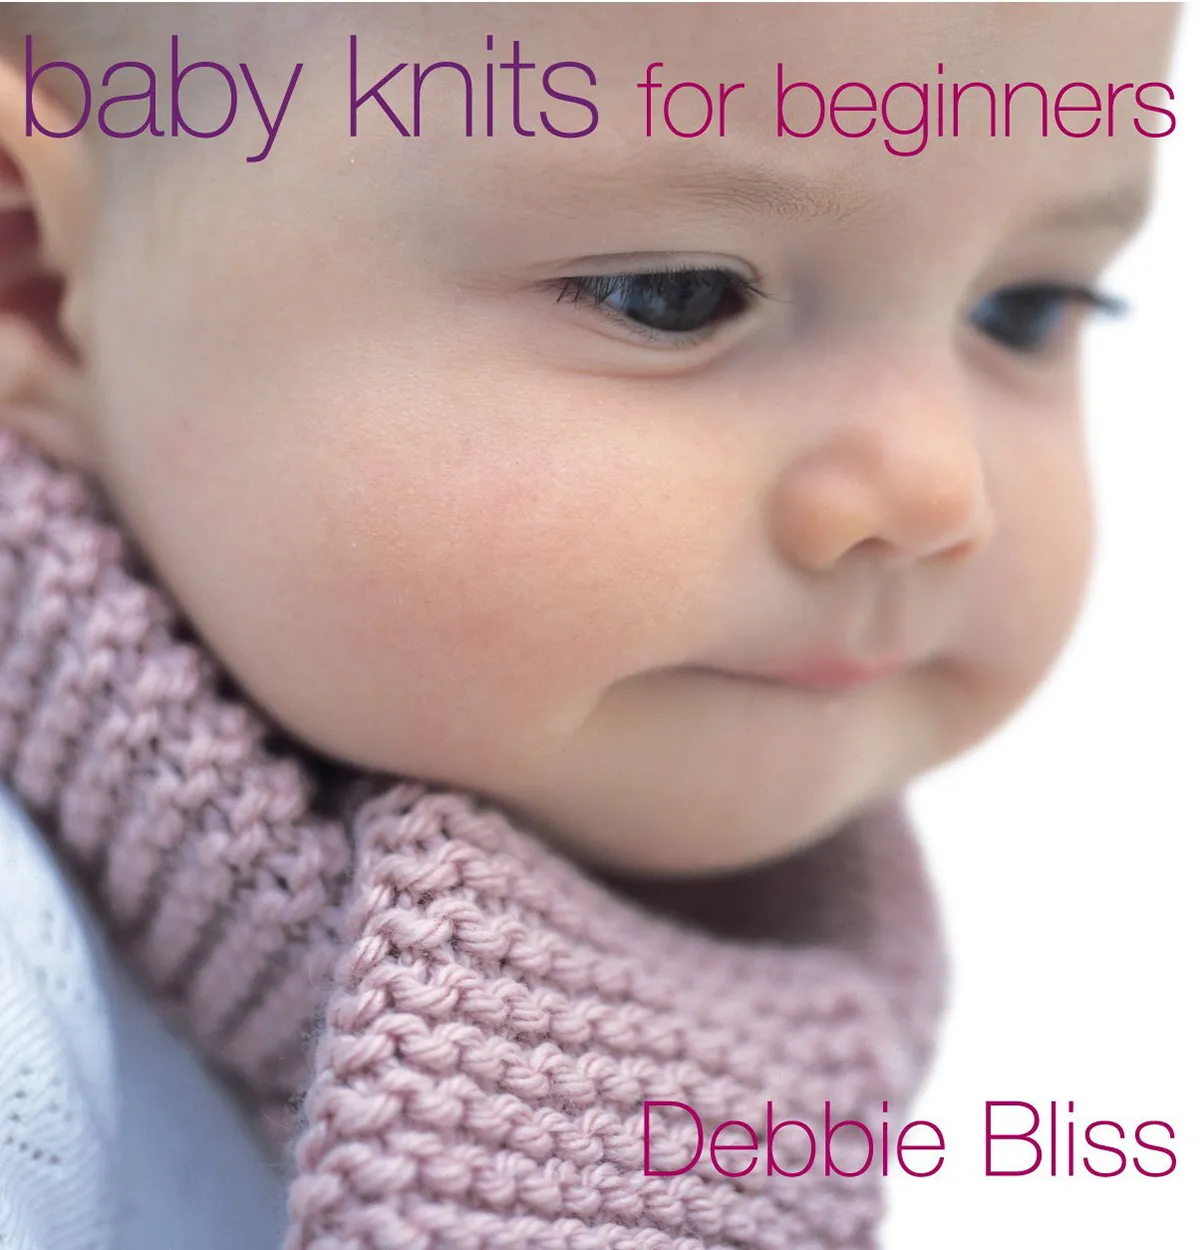 baby knits for beginners by Debbie Bliss